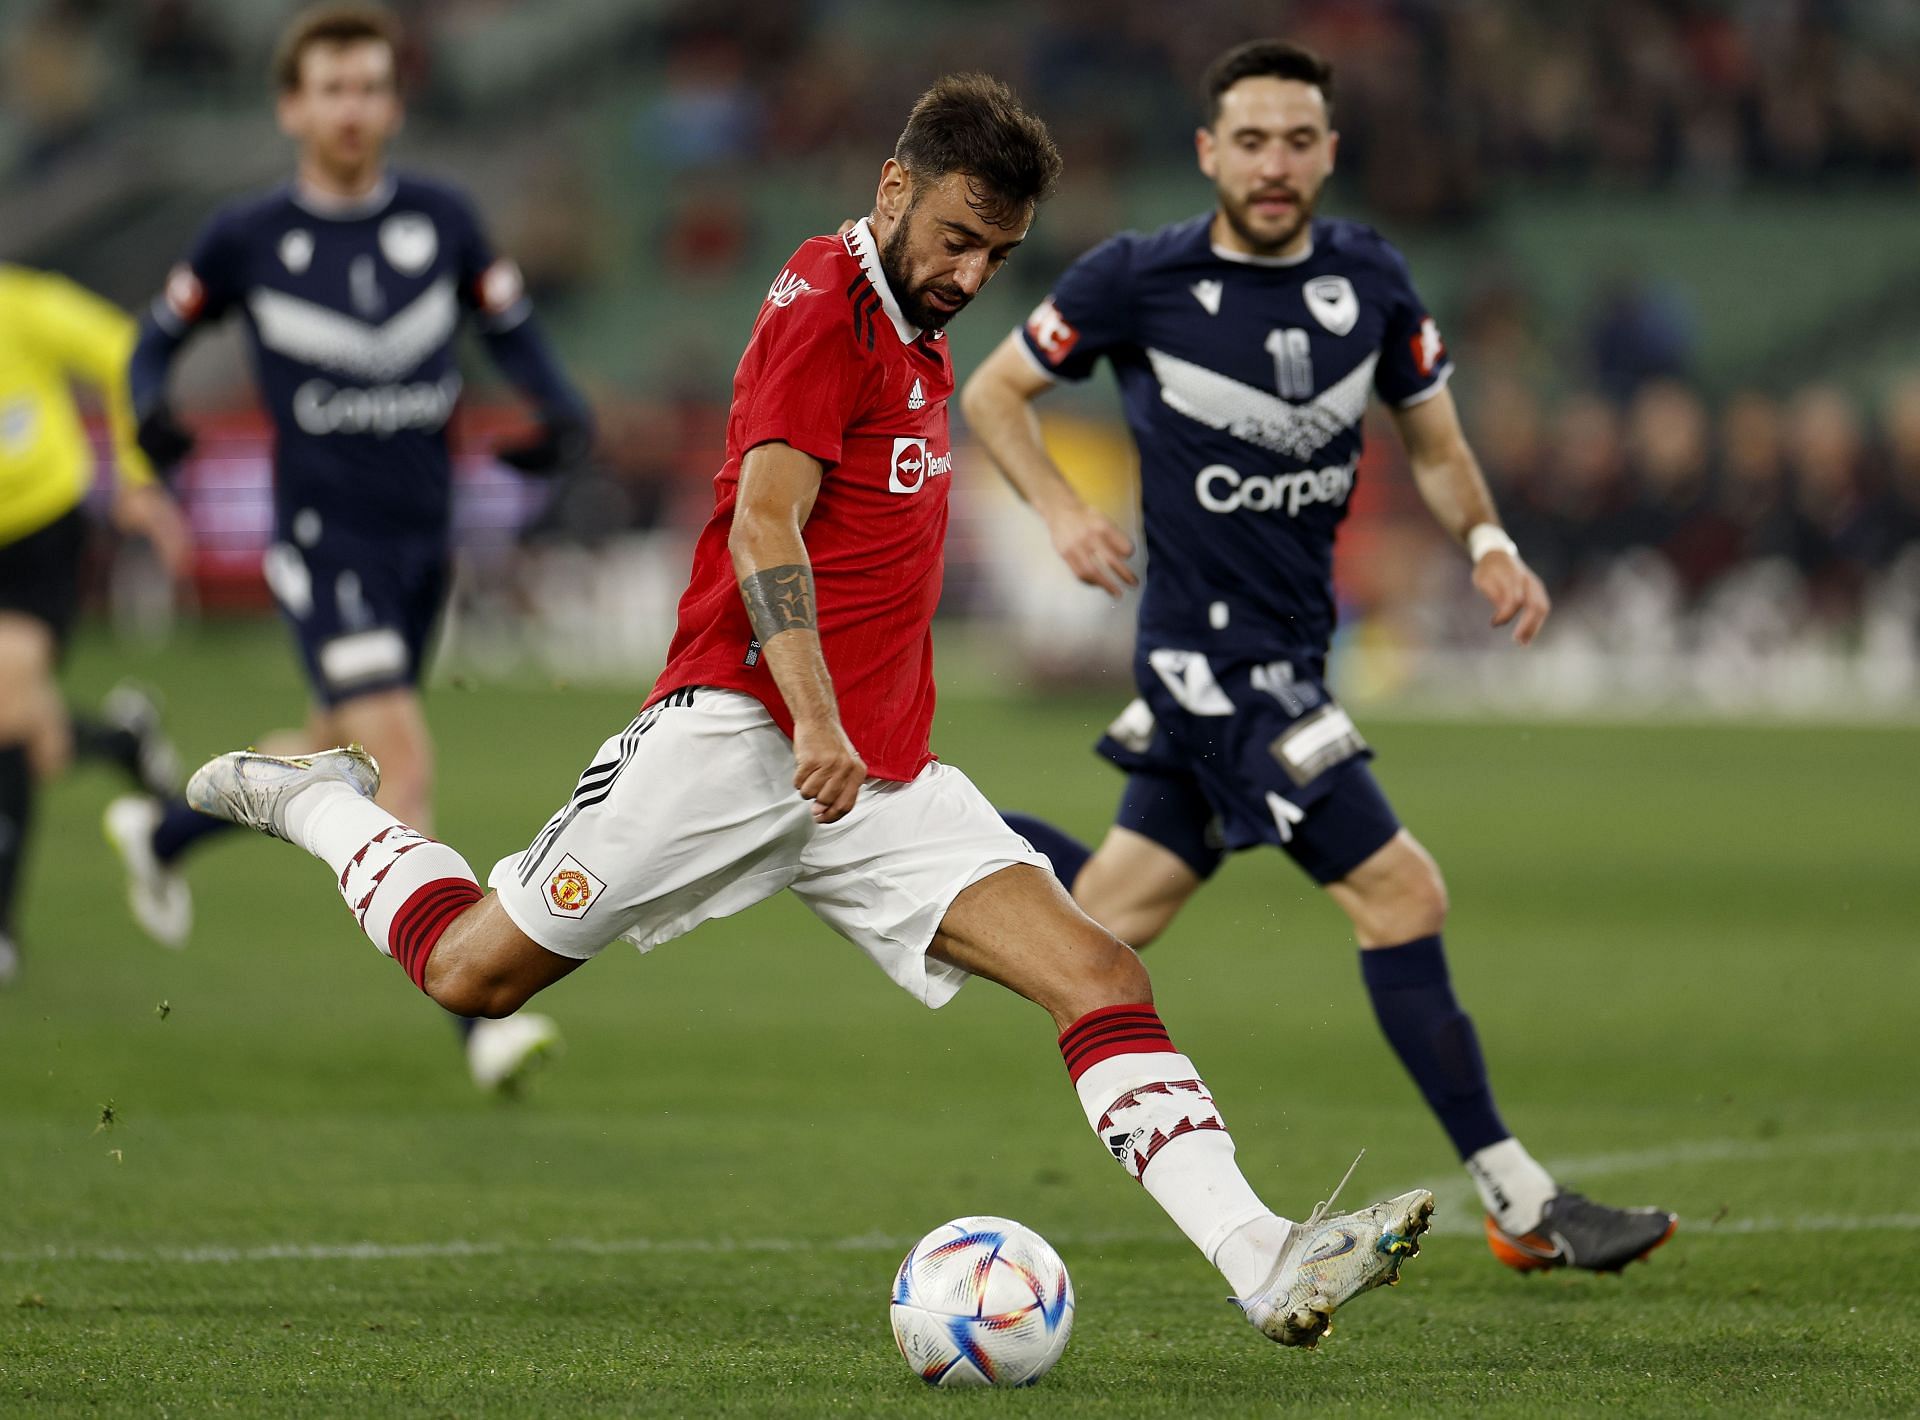 Melbourne win over Manchester United